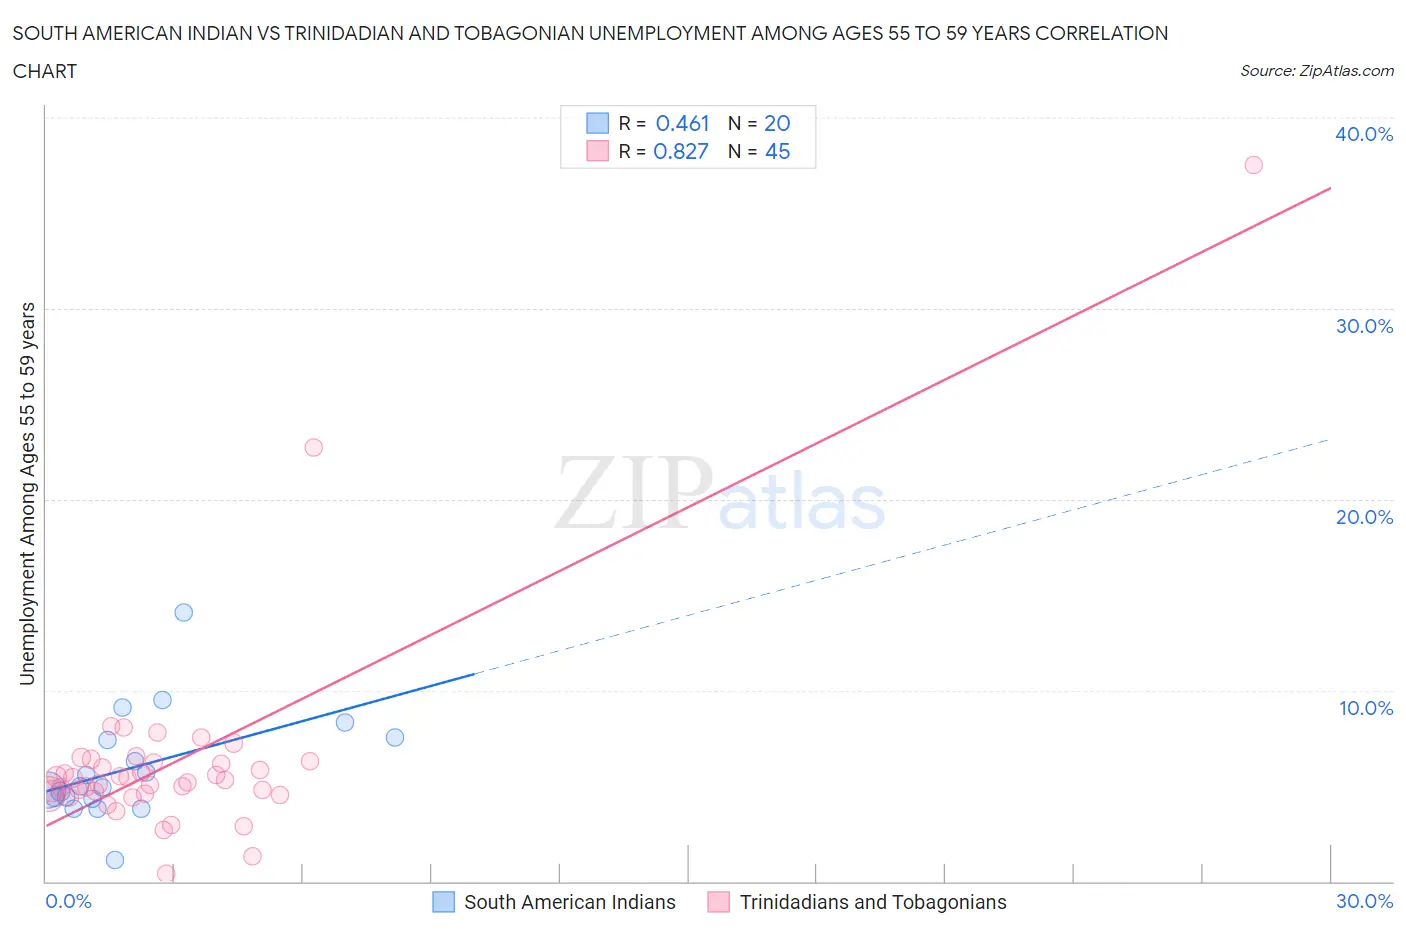 South American Indian vs Trinidadian and Tobagonian Unemployment Among Ages 55 to 59 years